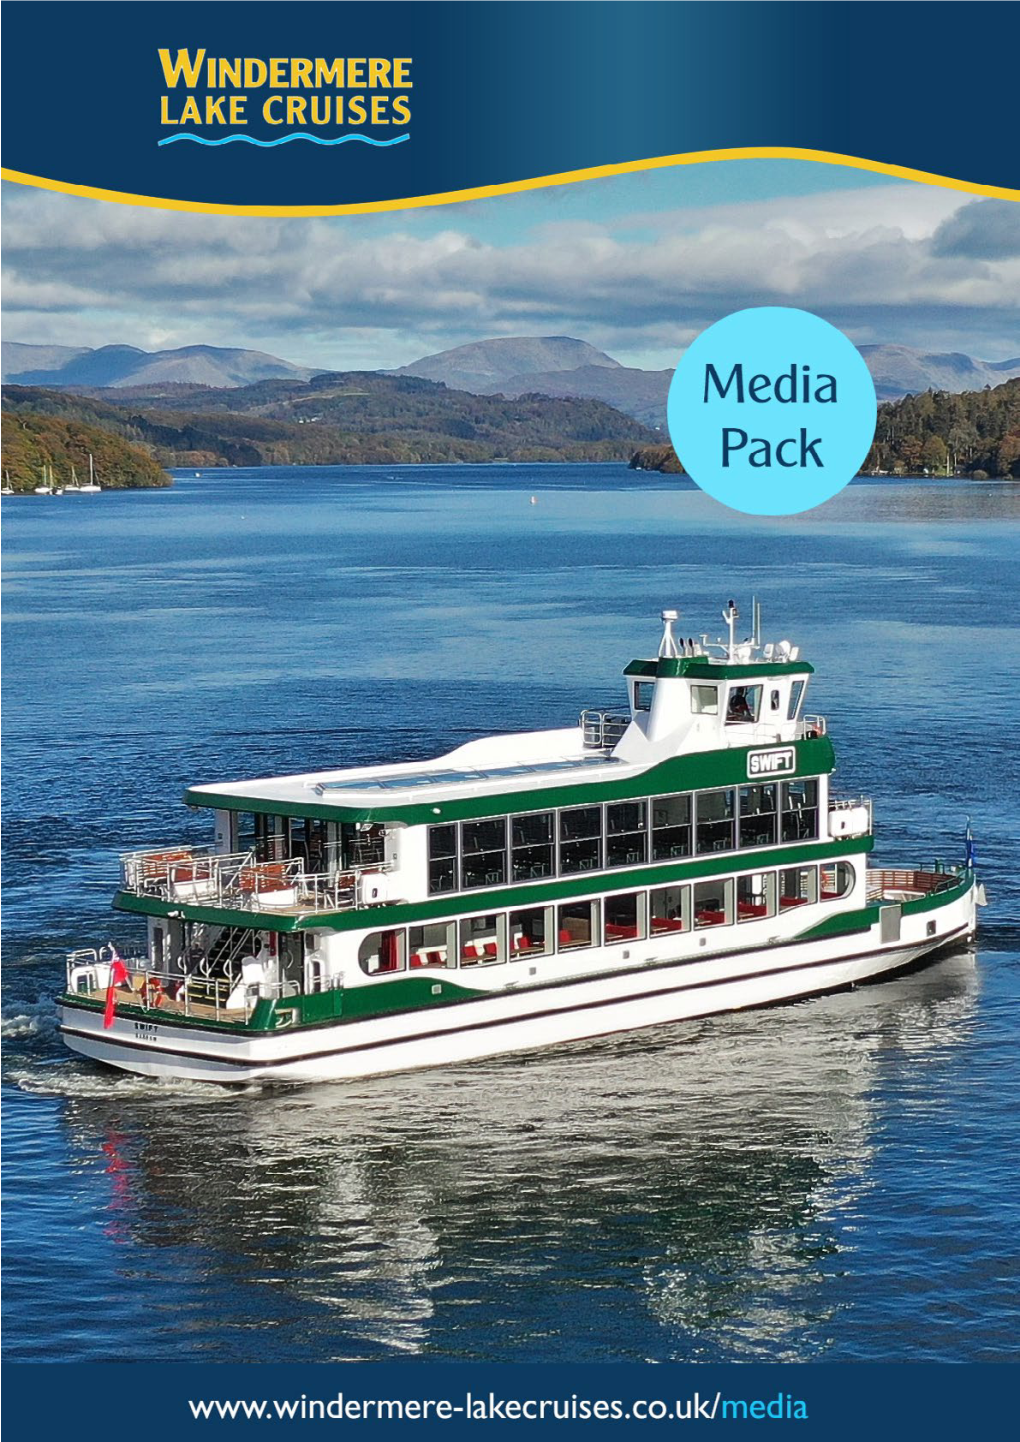 Sailing with Windermere Lake Cruises - the Essentials